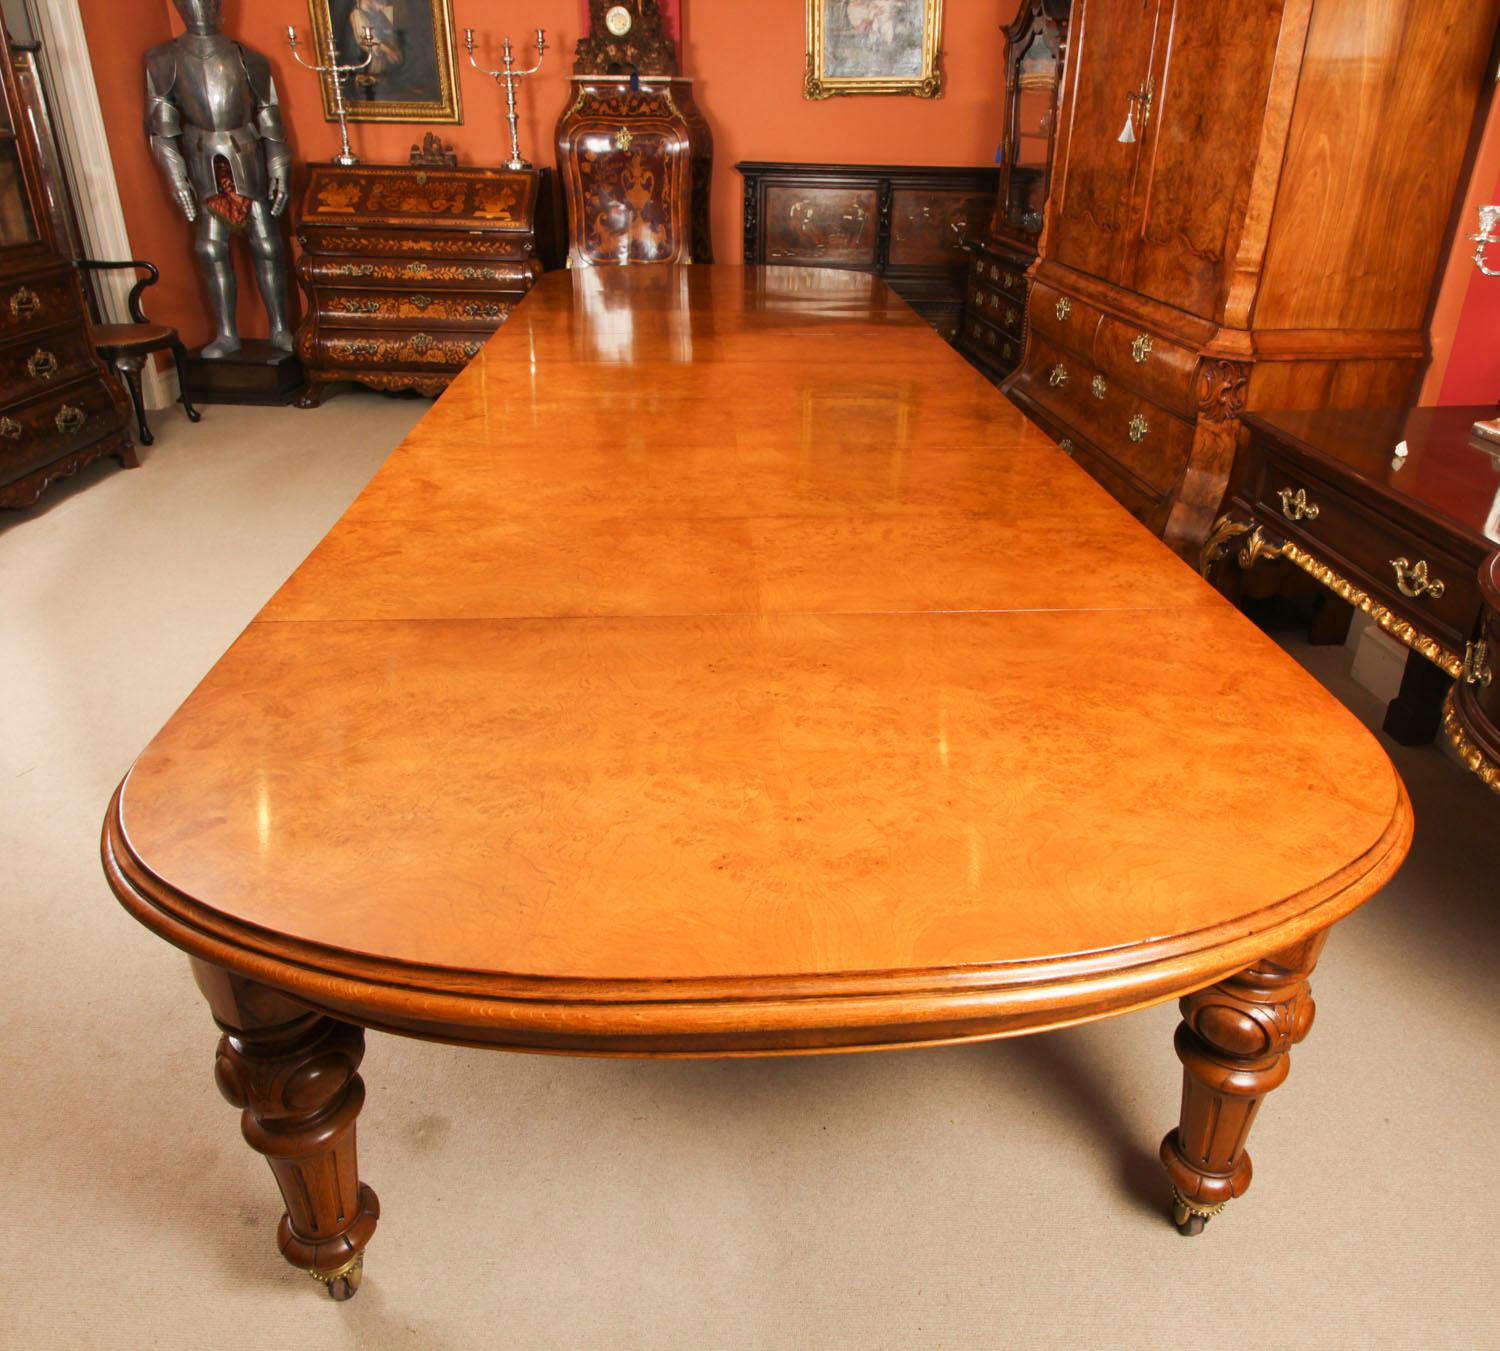 There is no mistaking the style and sophisticated design of this exquisite rare antique Victorian pollard oak extending dining table, circa 1870 in date.

This stunning dining table will stand out in your dining or conference room and will